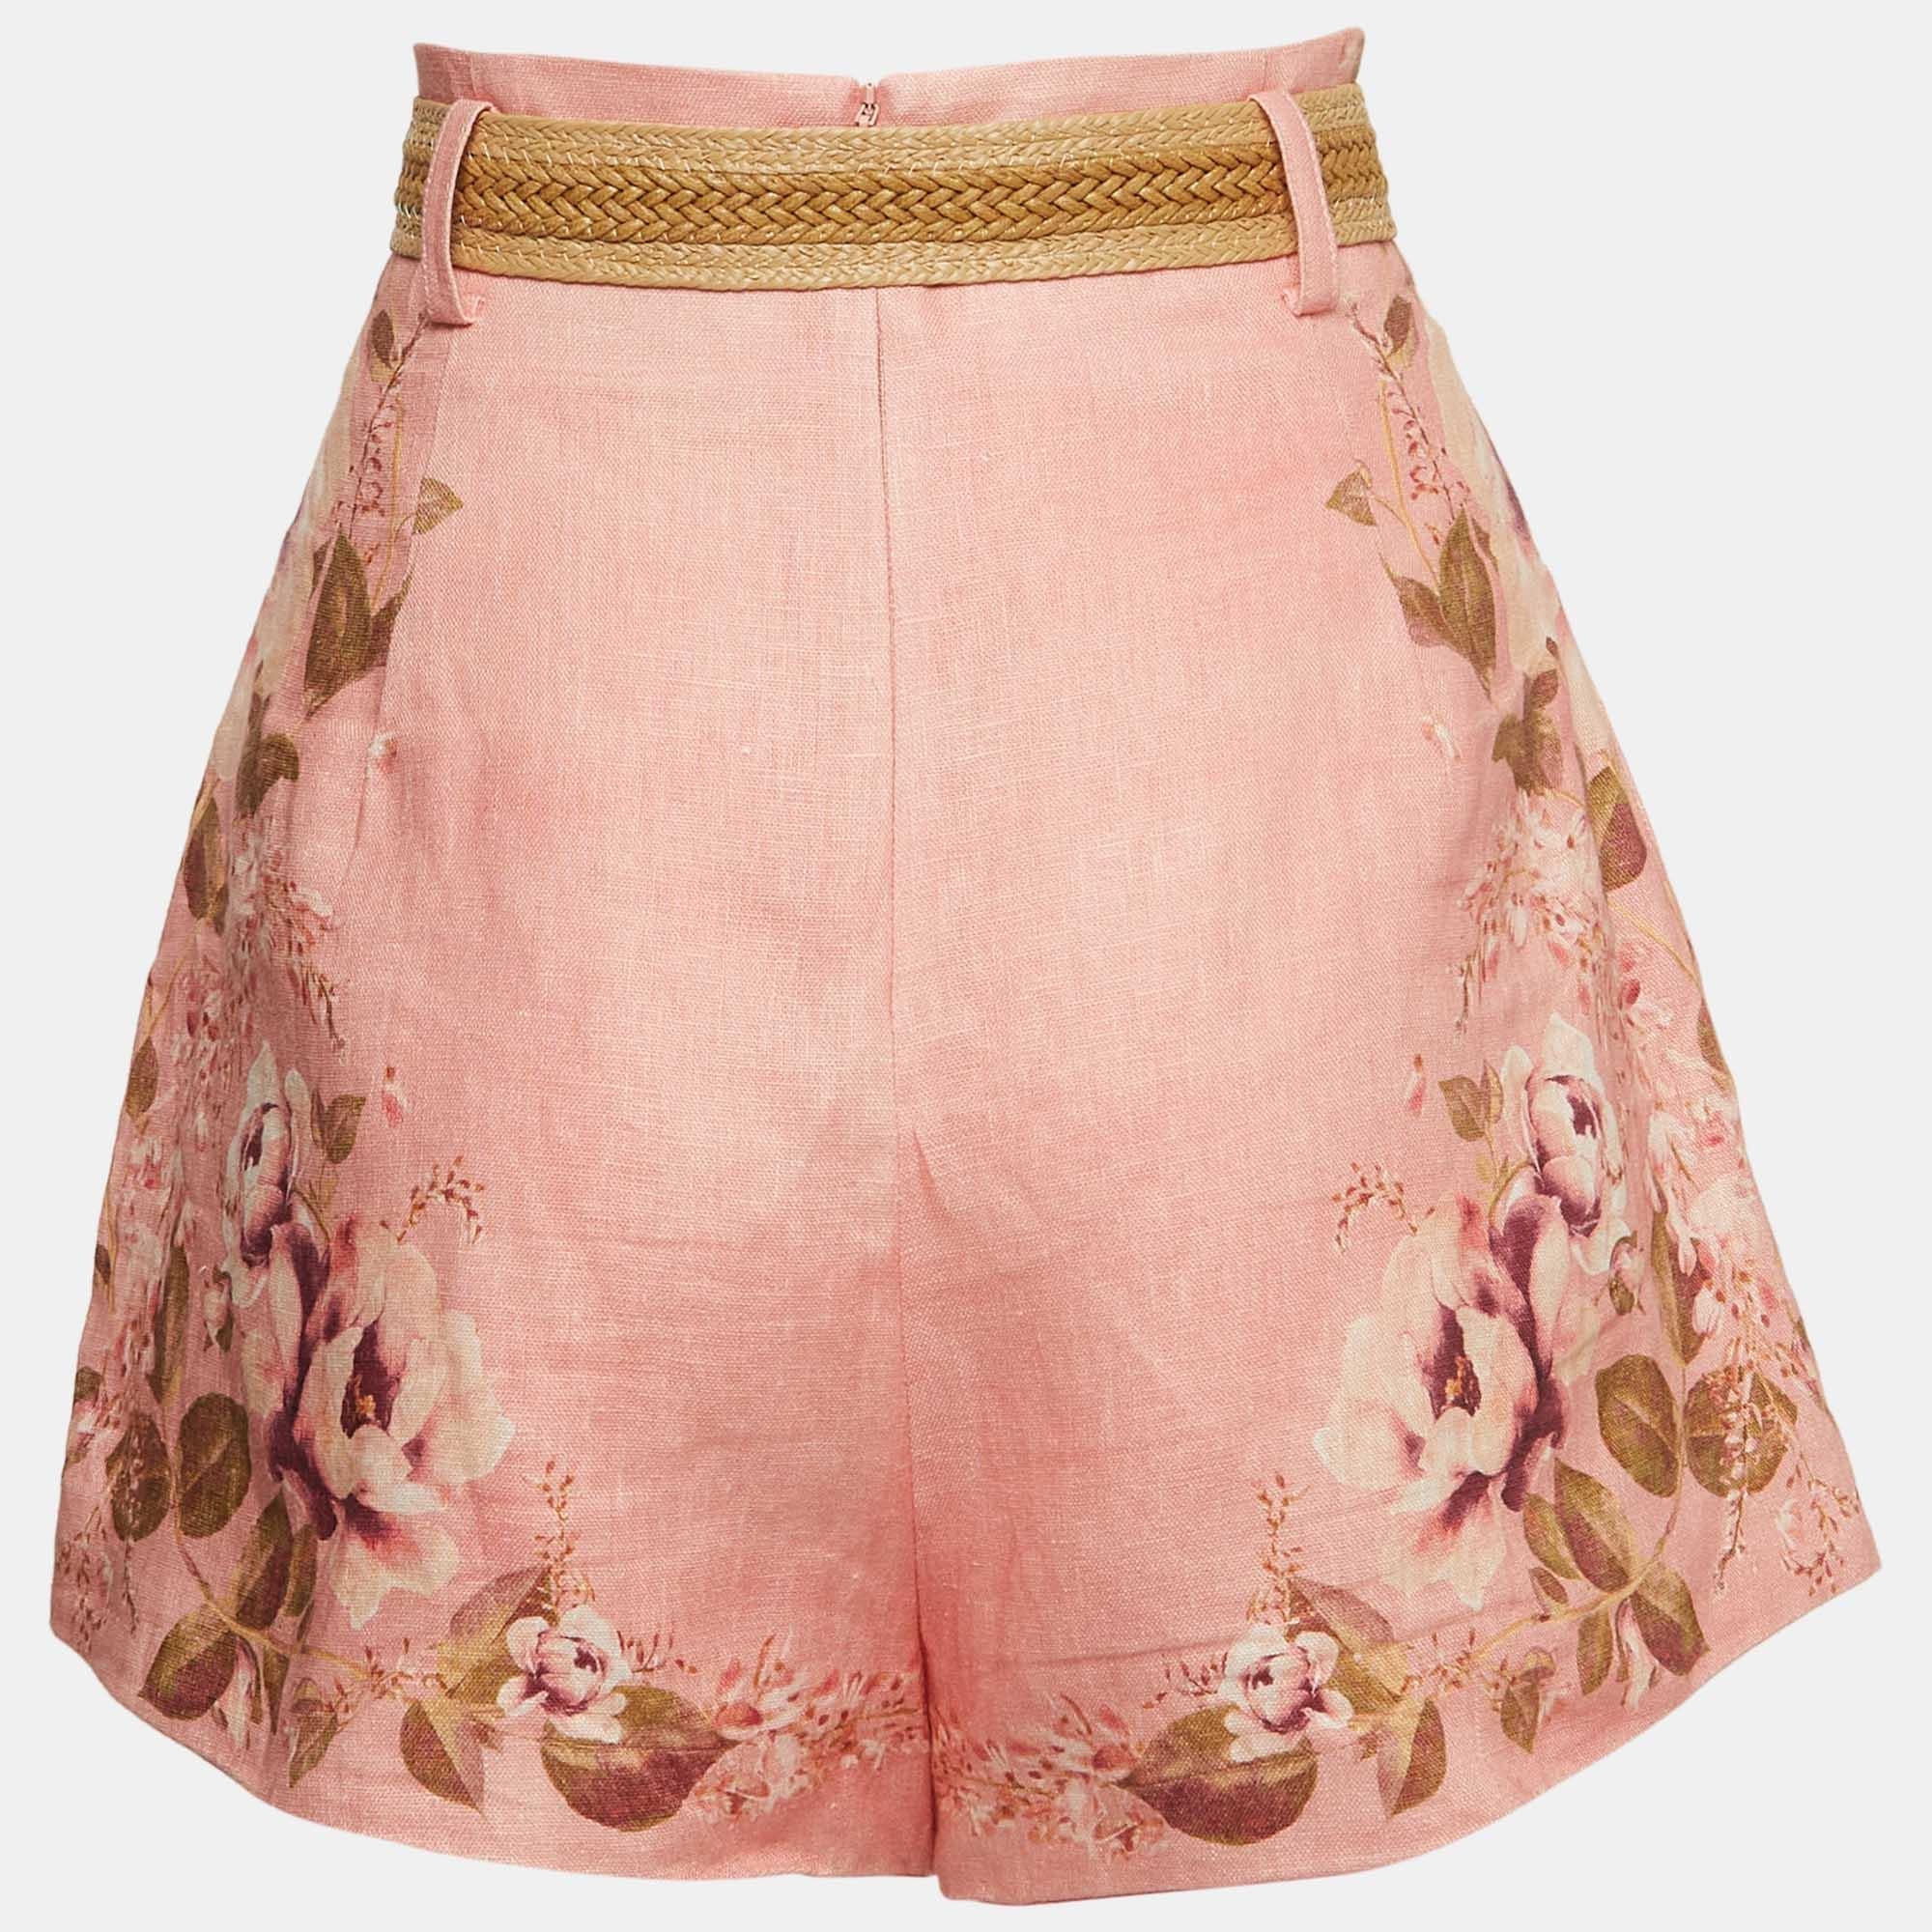 The Zimmermann shorts are a stylish summer essential. These shorts feature a delicate pink floral print on breathable linen fabric. They come with a matching belt for a flattering fit and a touch of elegance, making them perfect for casual